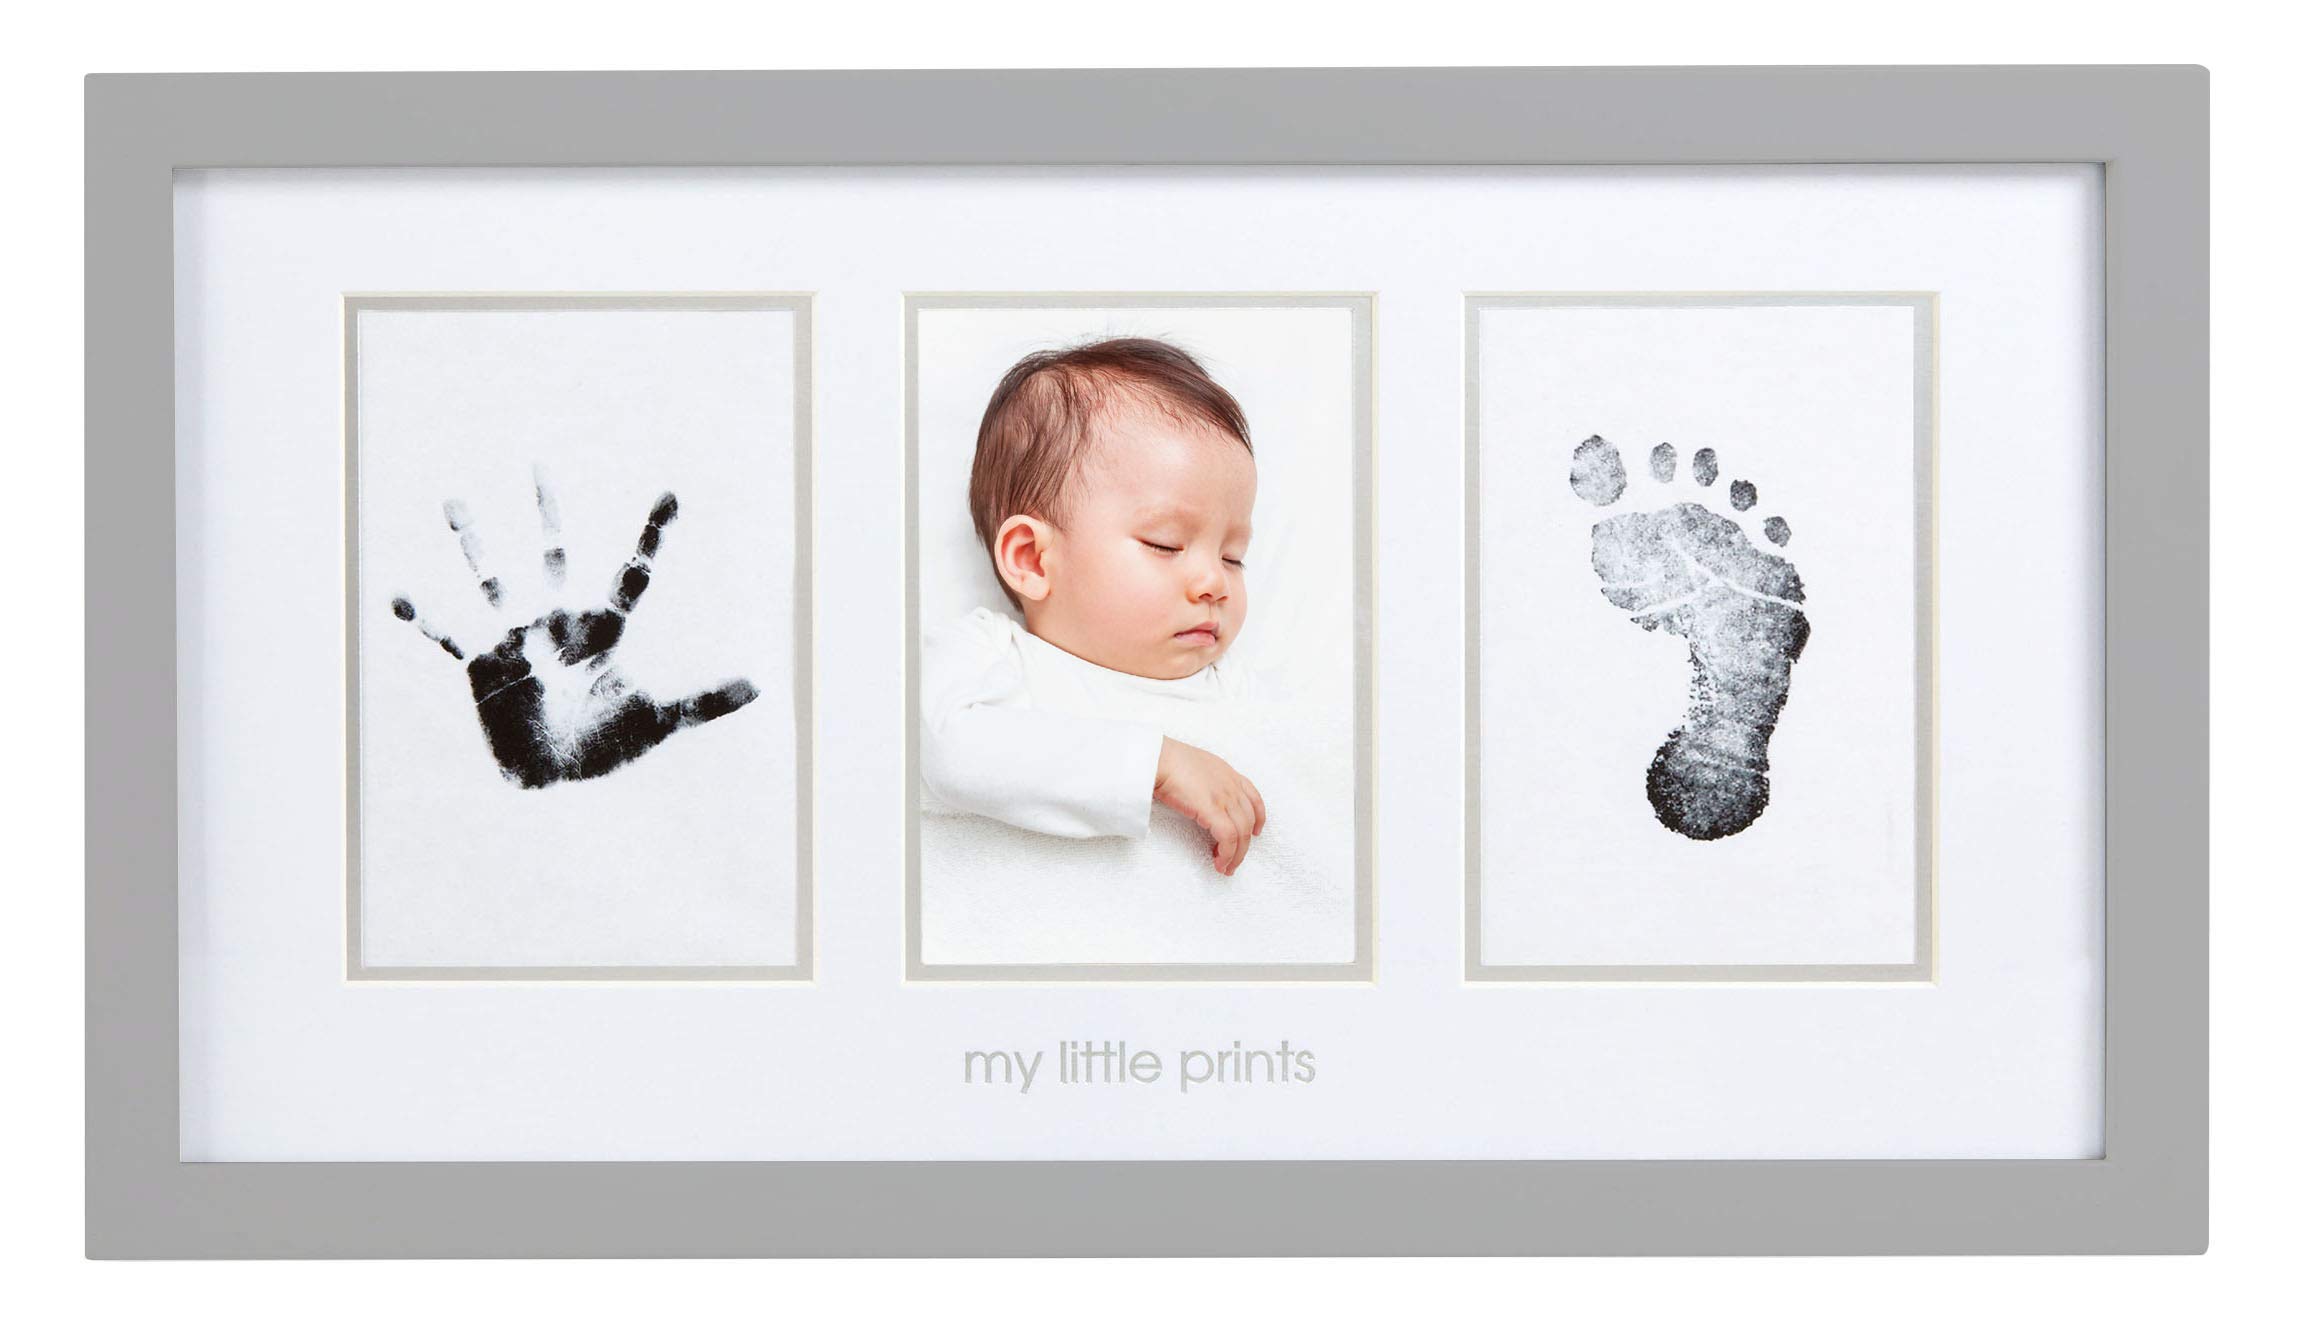 Pearhead Newborn Babyprints Photo Frame Baby Handprint and Footprint Keepsake Kit, Gender-Neutral Nursery Décor, Baby Accessory for New and Expecting Parents, Gray